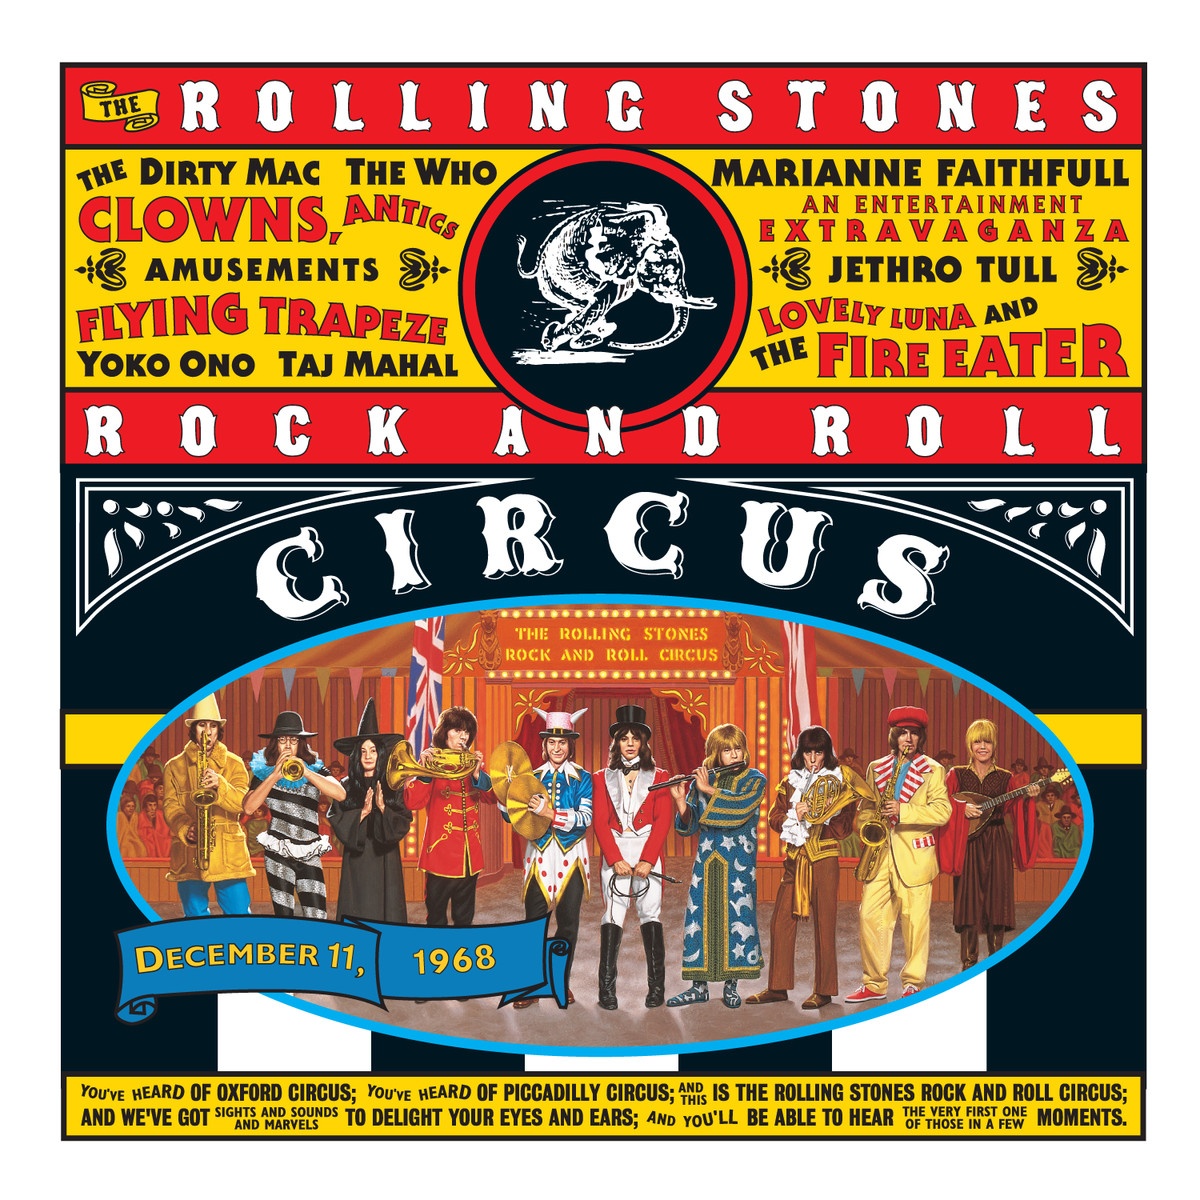 Mick Jagger's Introduction Of "Rock And Roll Circus"